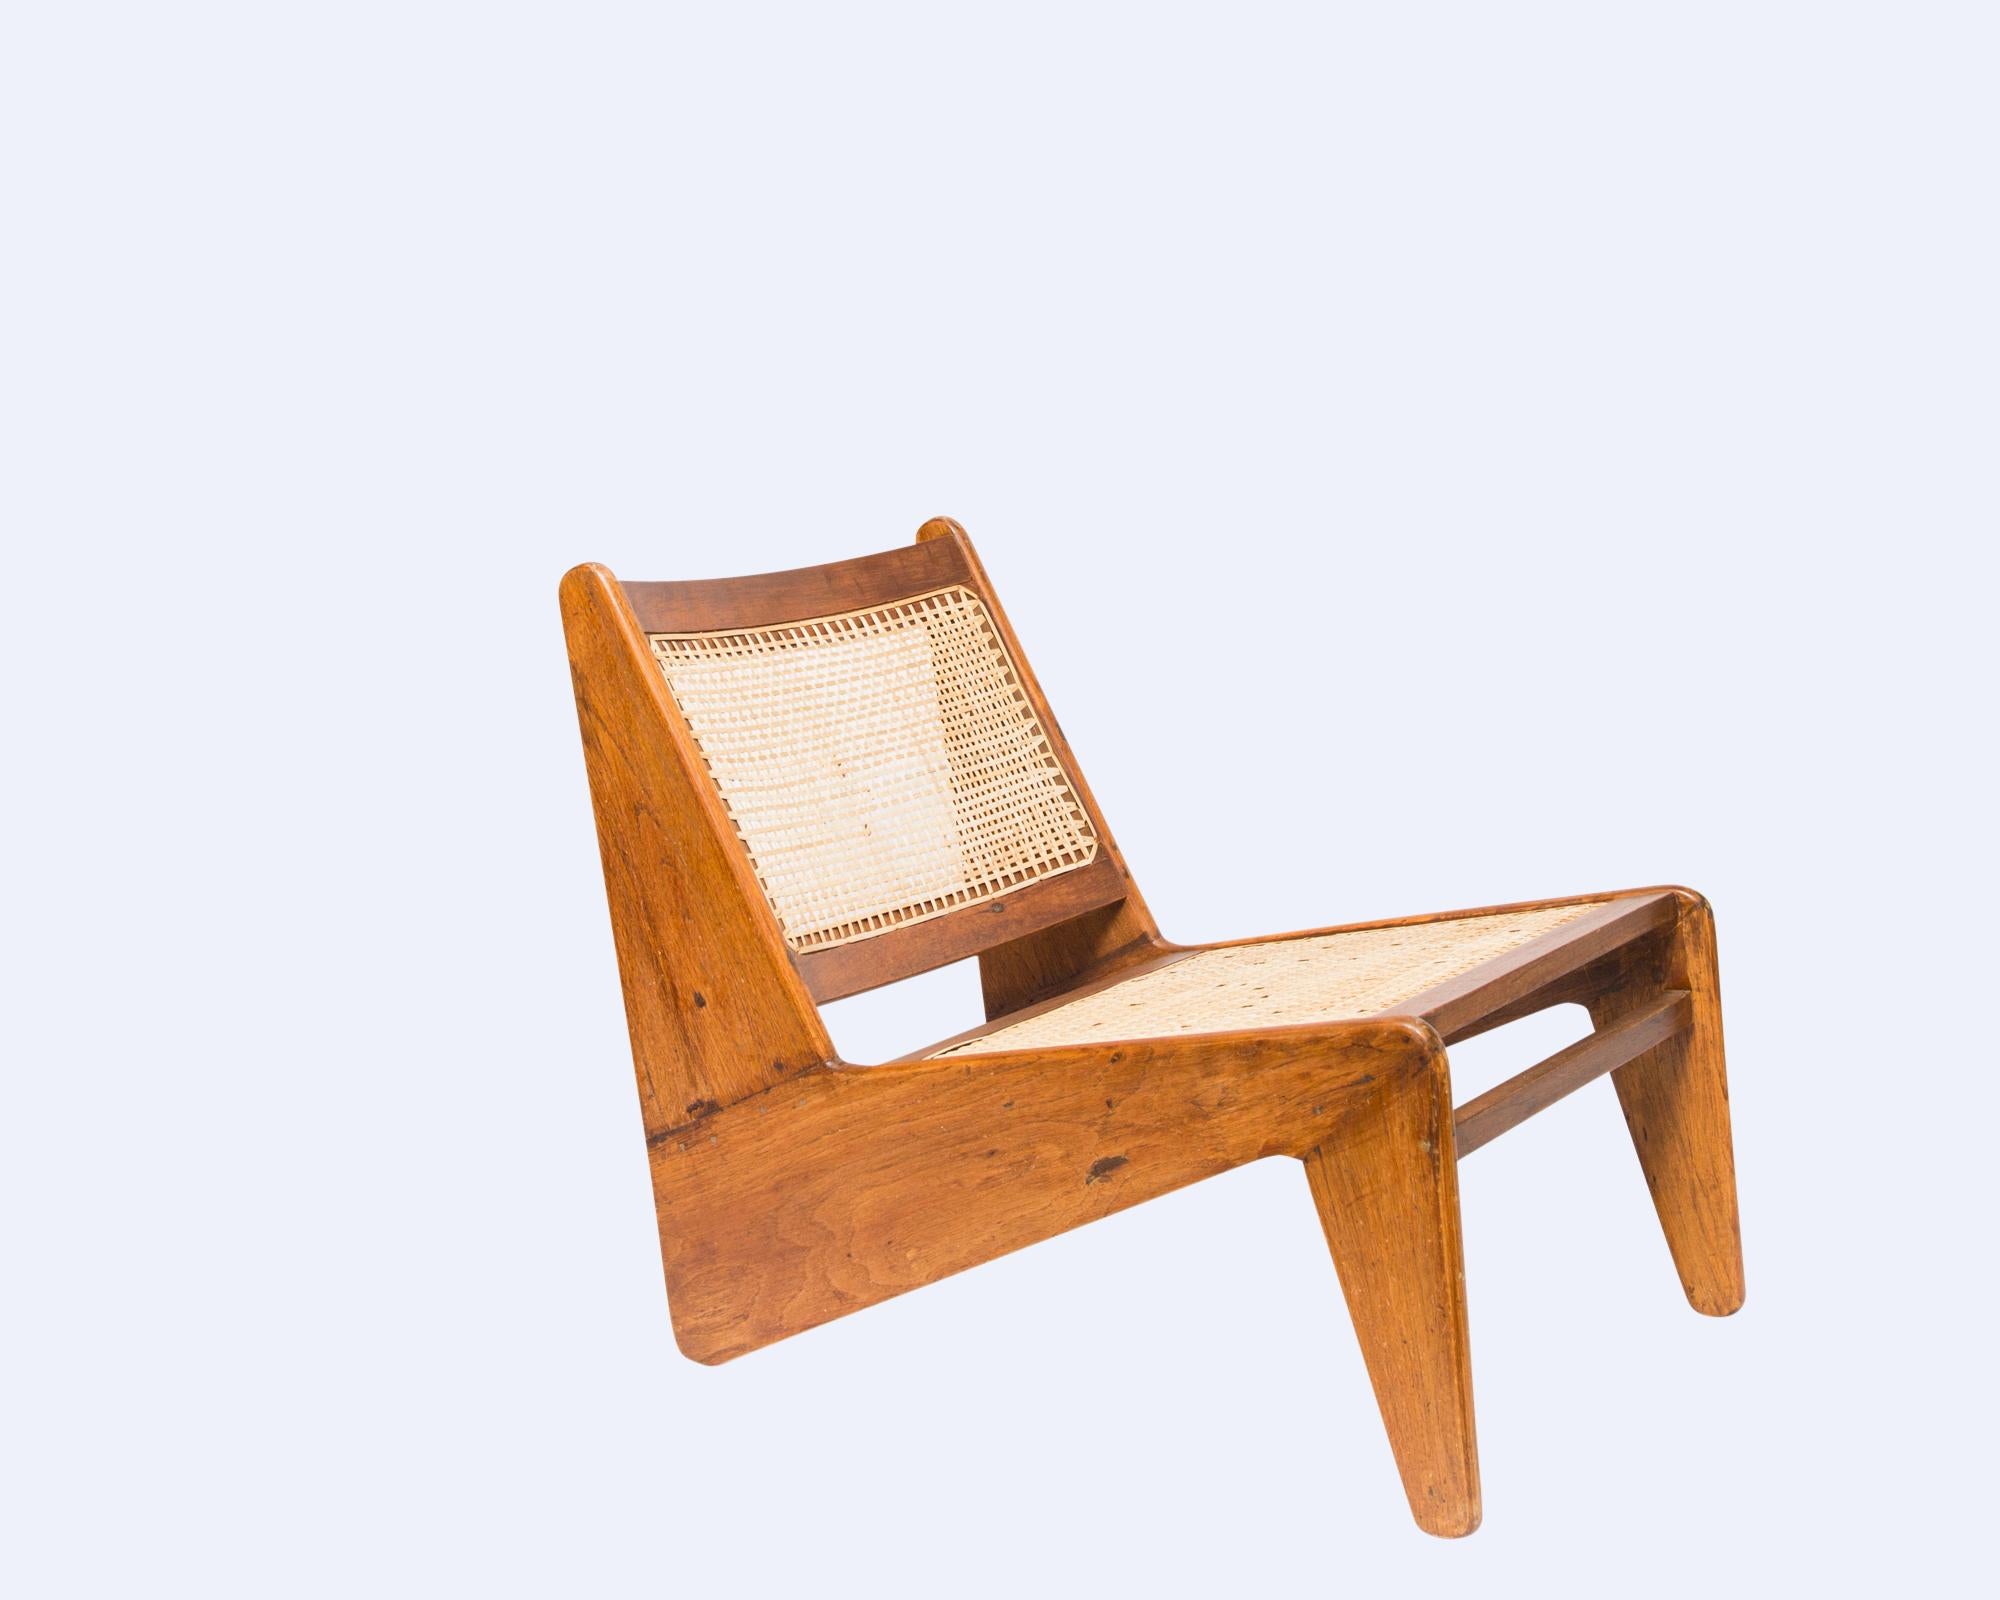 Pierre Jeanneret Kangaroo living room set in teak

Includes:
• 1x kangaroo bench
• 2x kangaroo chair
(Three Pieces Total))

• Excellent condition for age
• Includes “Certificate of Authenticity”, certified by Jacques Dworczak, world-renowned